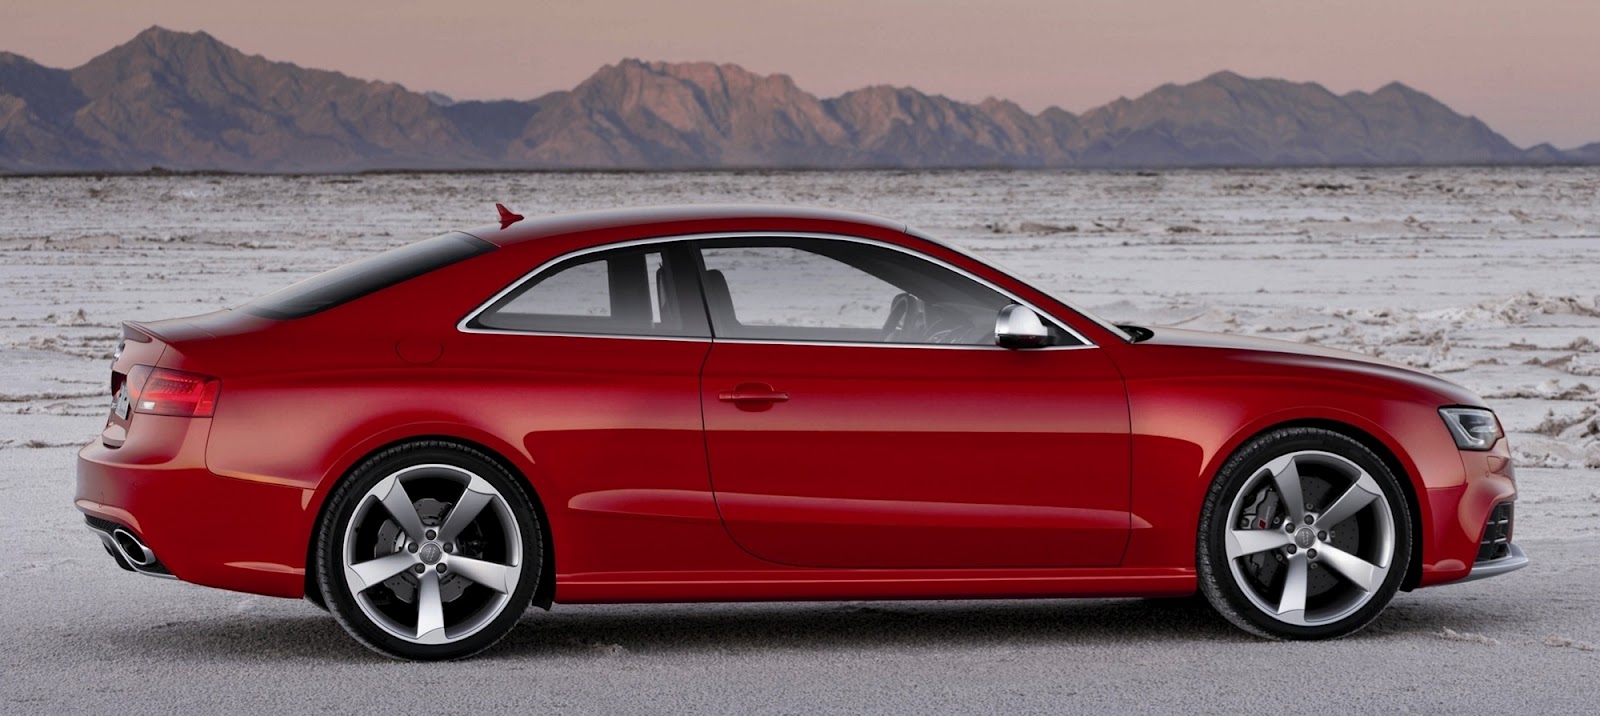 [autowp.ru_audi_rs5_coupe_5%255B2%255D.jpg]